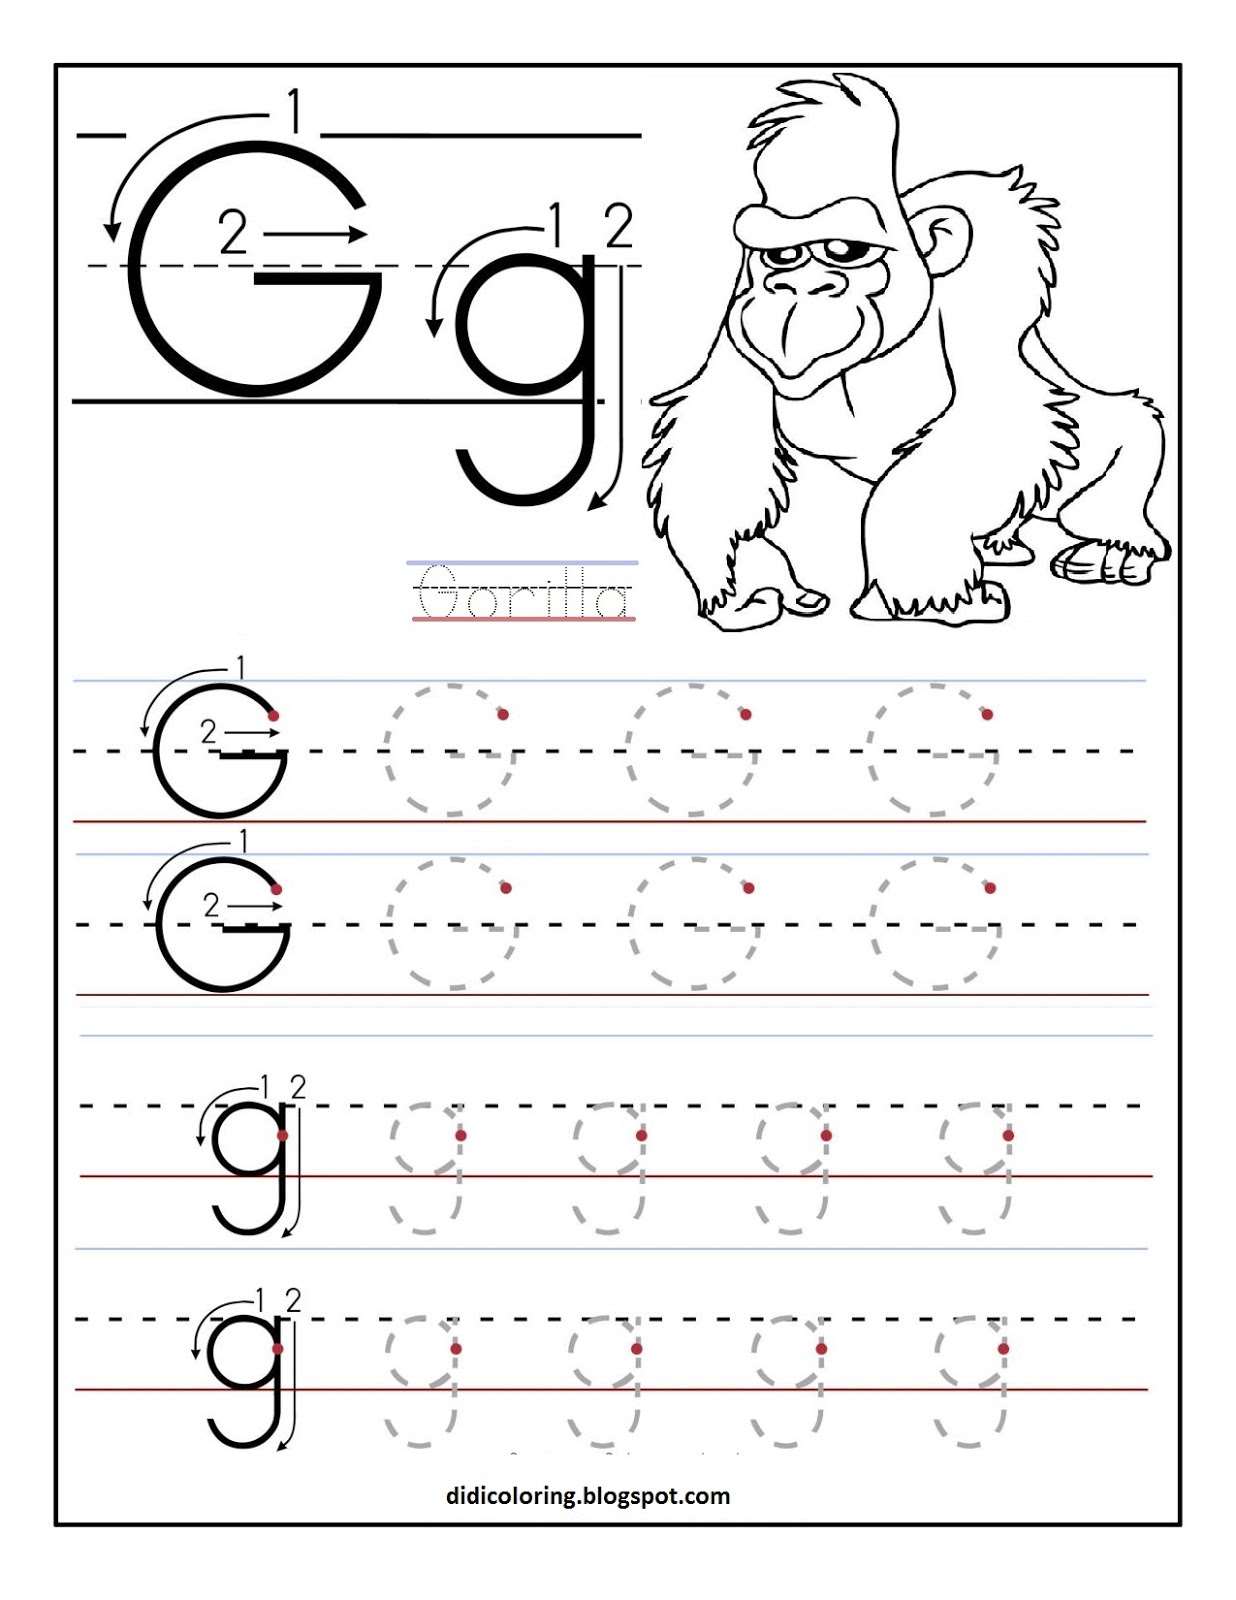 free-printable-worksheet-for-kids-best-for-your-child-to-learn-and-write